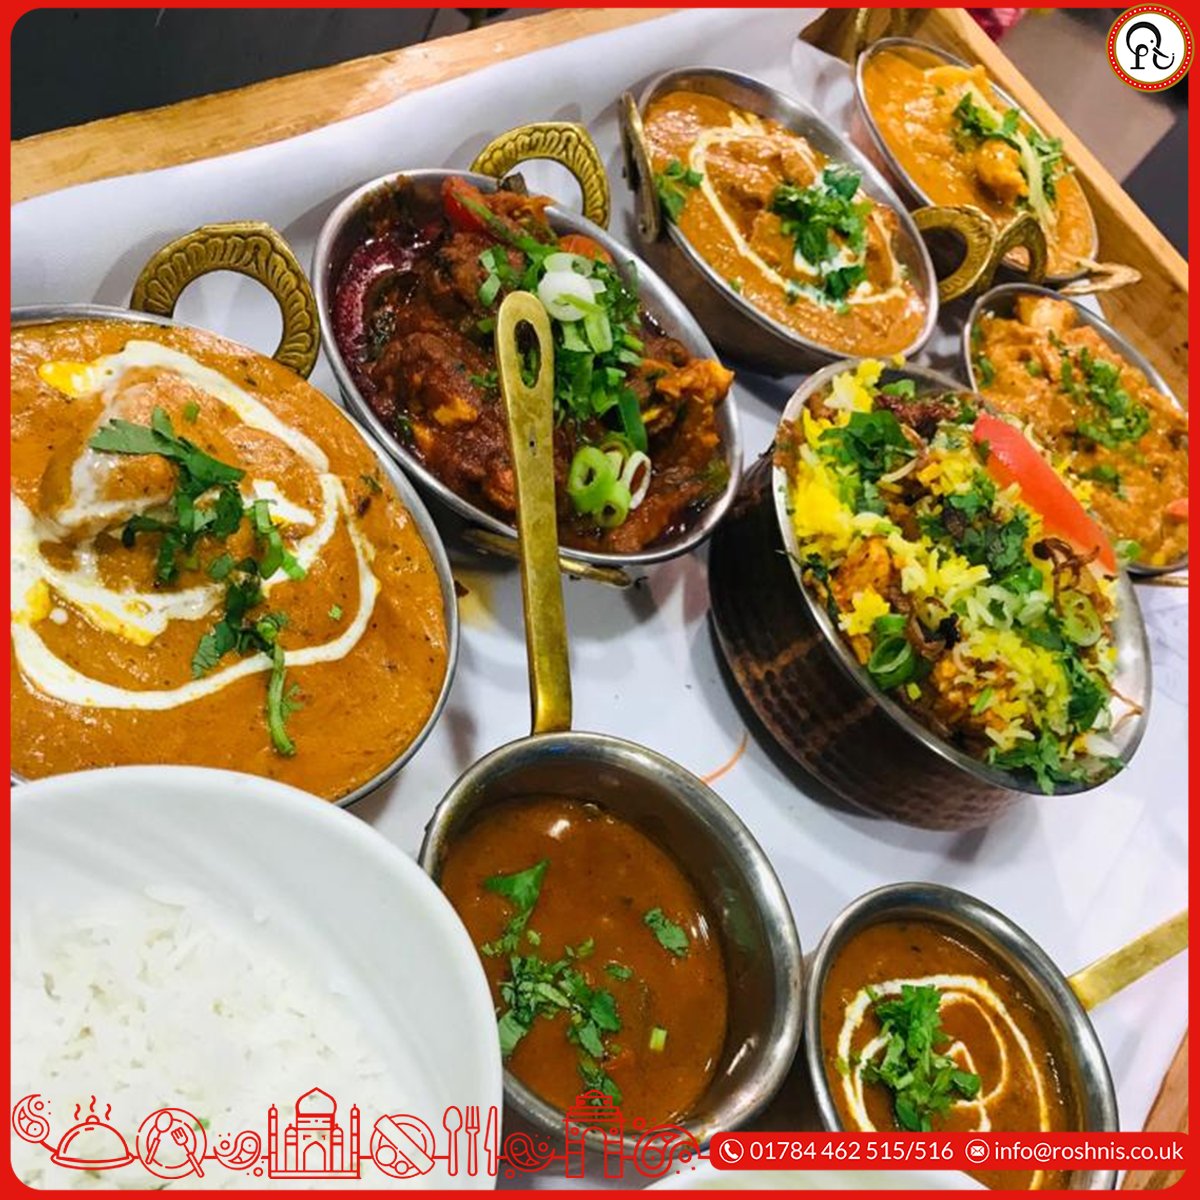 We bring you a Variety of Indian Flavors and Spicy Tadka’s to fill your Hunger.

Call us for Reservations - 01784 462 515 
Email us on info@roshnis.co.uk.

#Roshnis #buffet #foodvariety #curries #biryani  #Staines #discount  #food  #curryhouse #curry #foodplatter #currydish